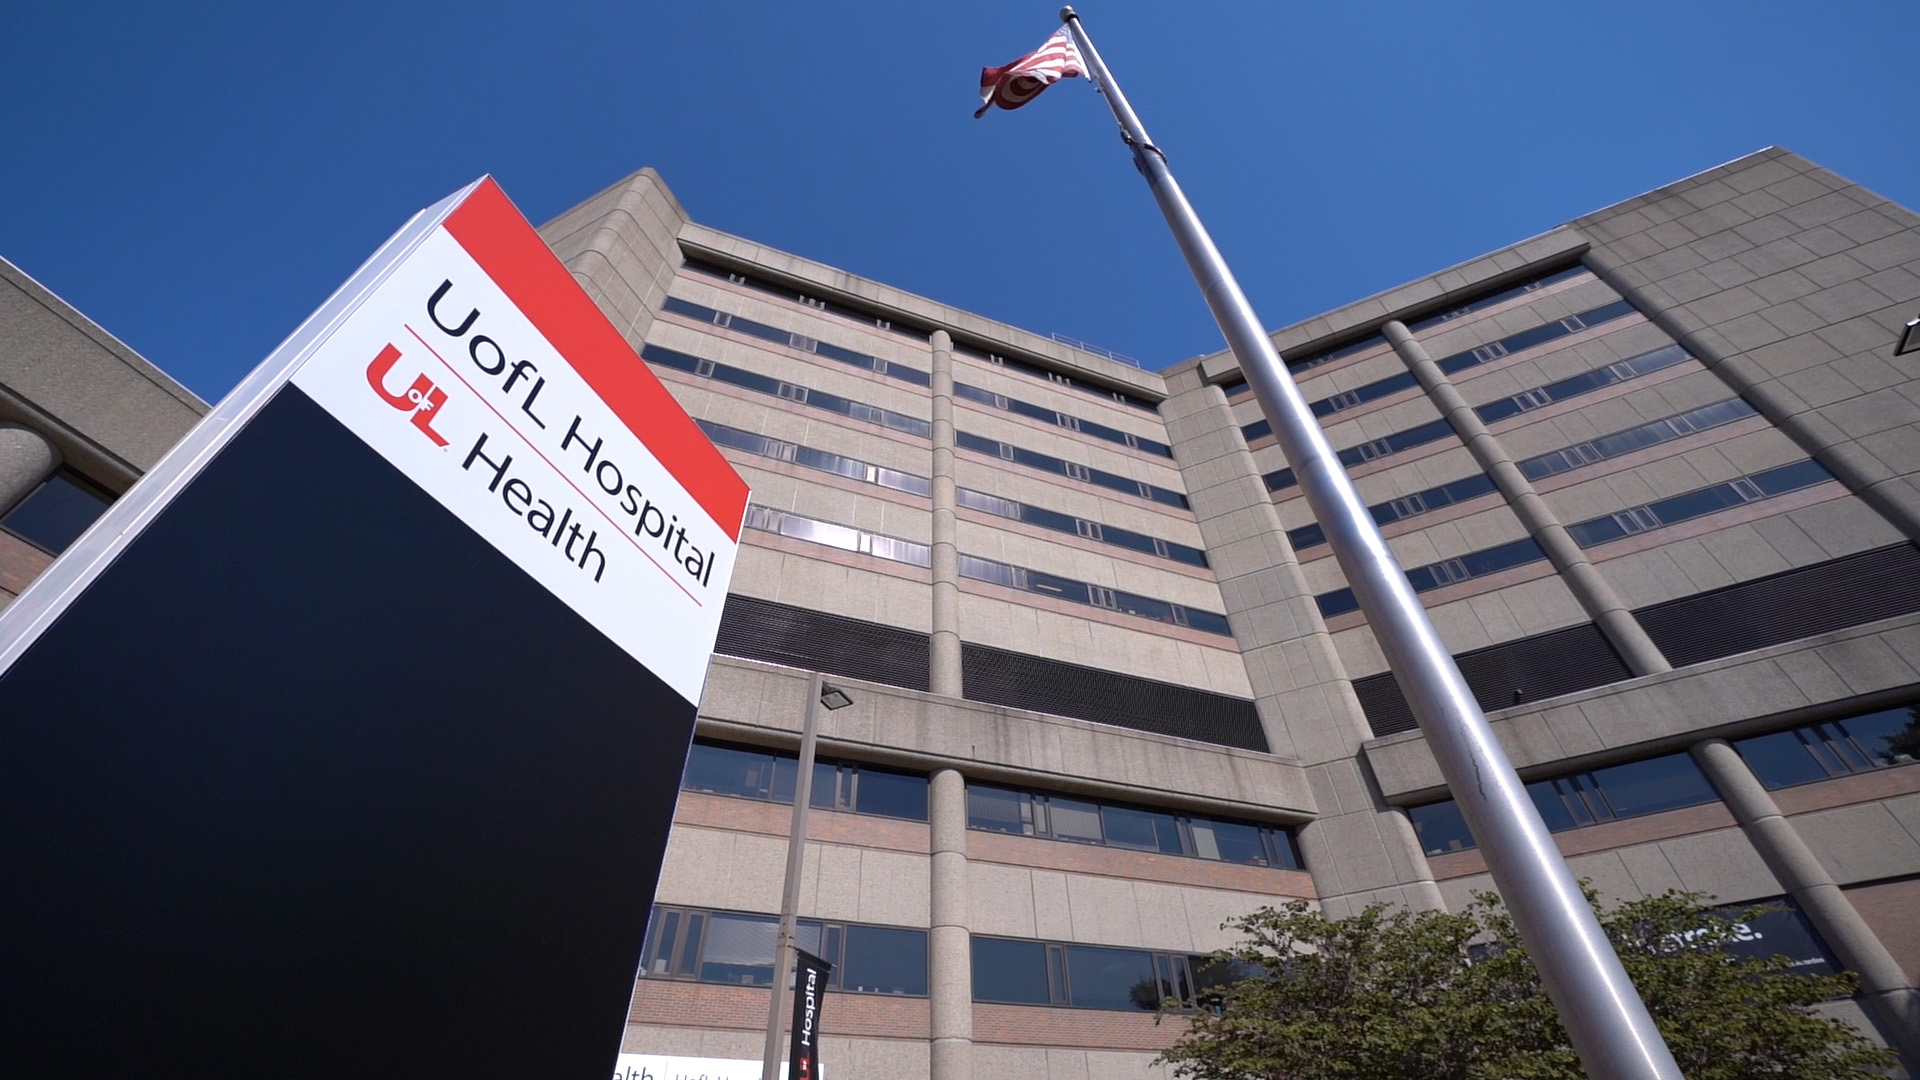 U of L Health Named Official Health Care Provider of Cardinal